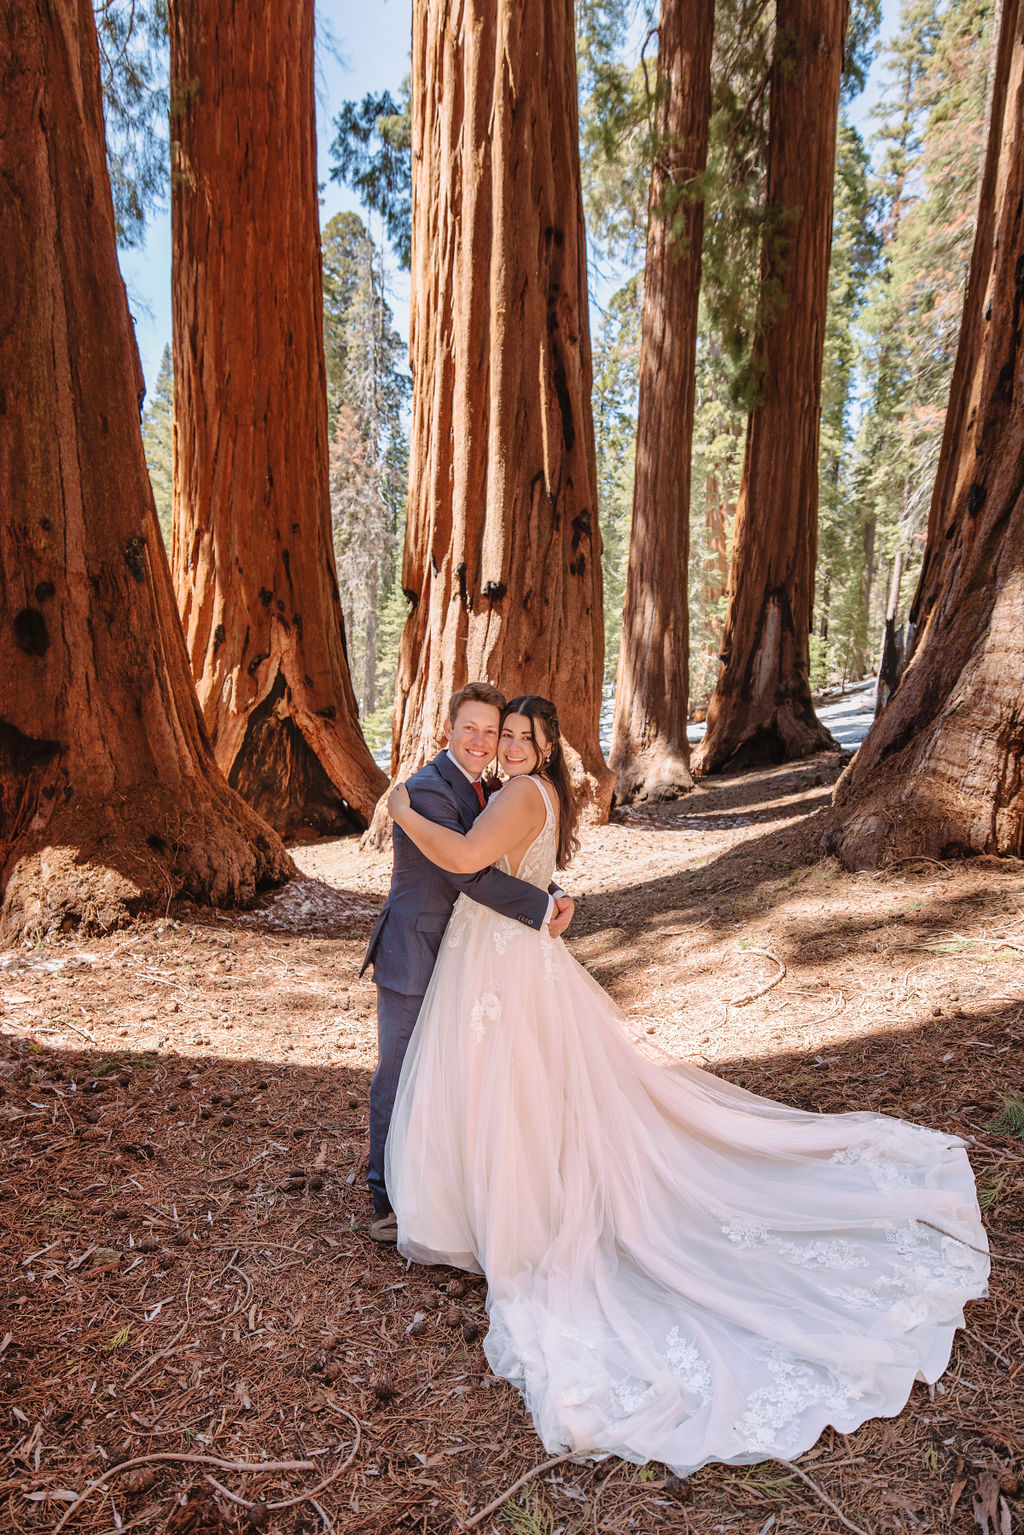 A bride and groom in a forest, surrounded by tall trees, with the bride wearing a long, flowing wedding gown at their Adventurous Elopement at Sequoia National Park